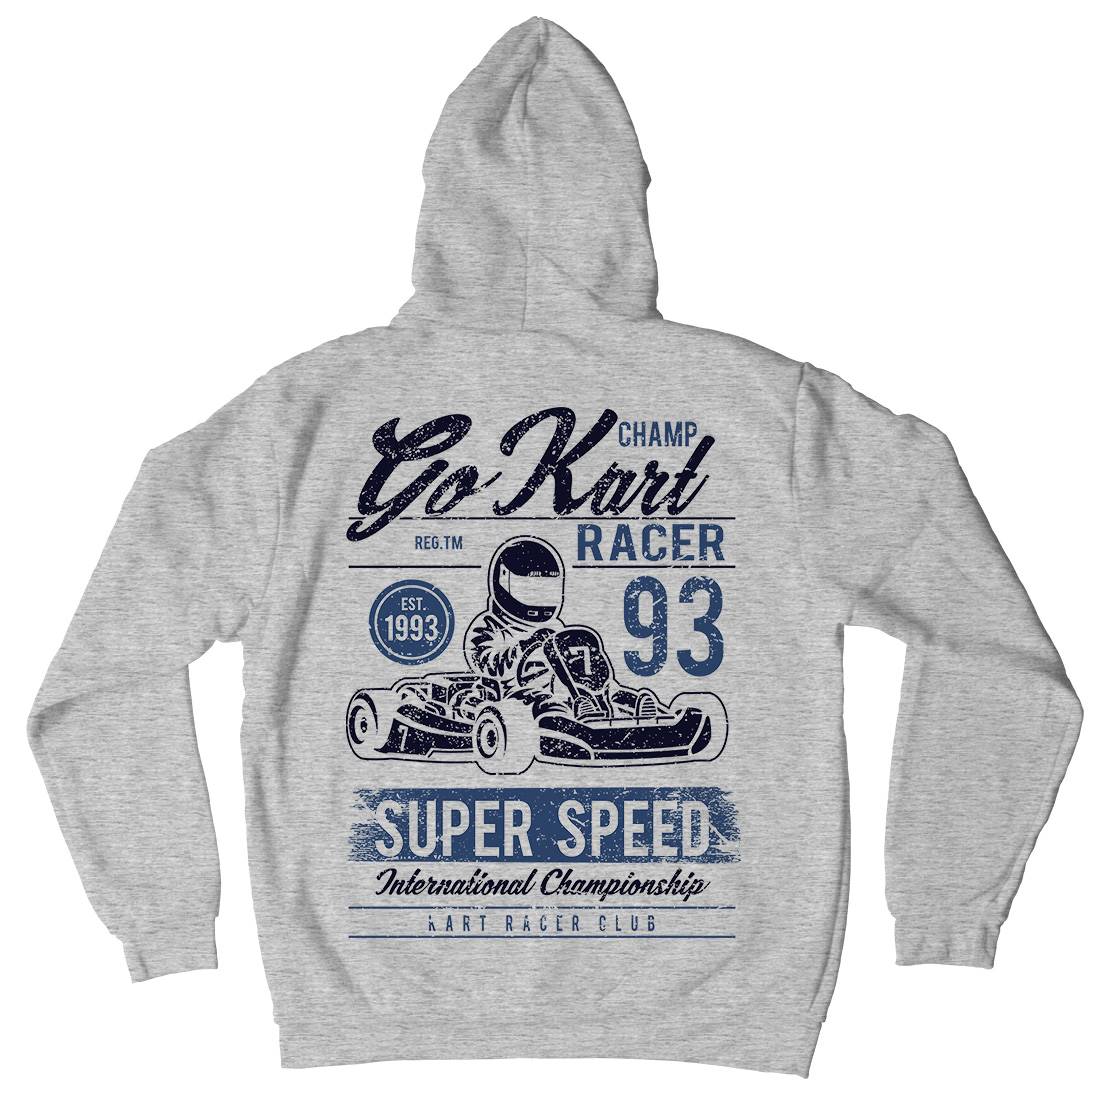 Go Kart Racer Mens Hoodie With Pocket Cars A058